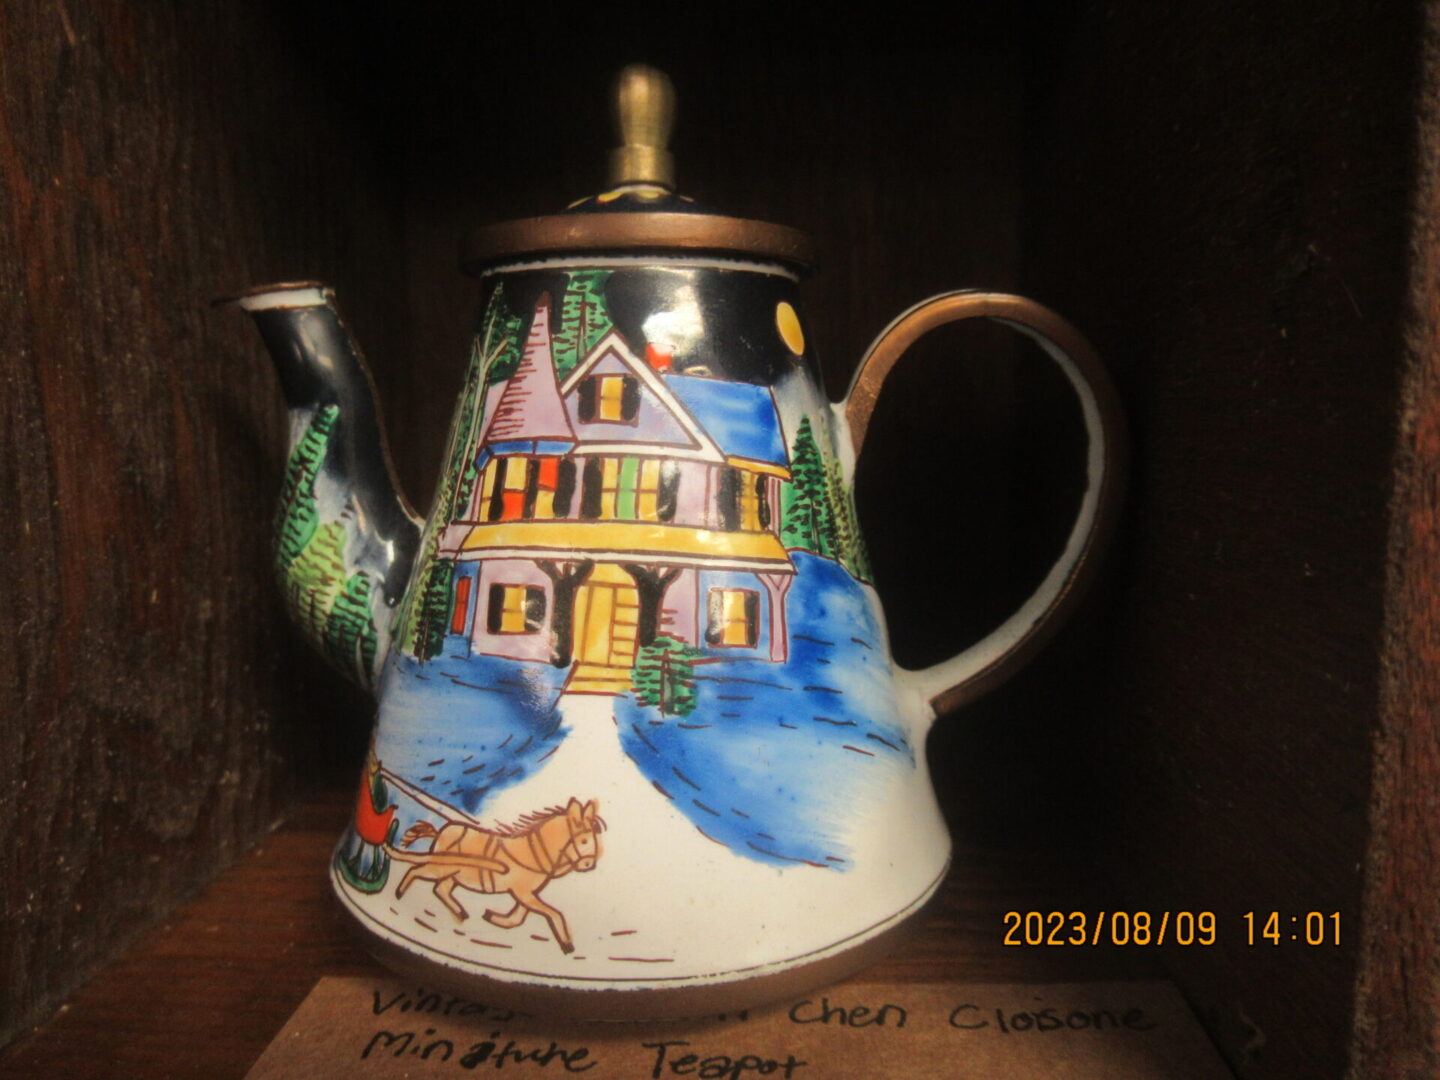 A tea pot with a picture of a house on it.